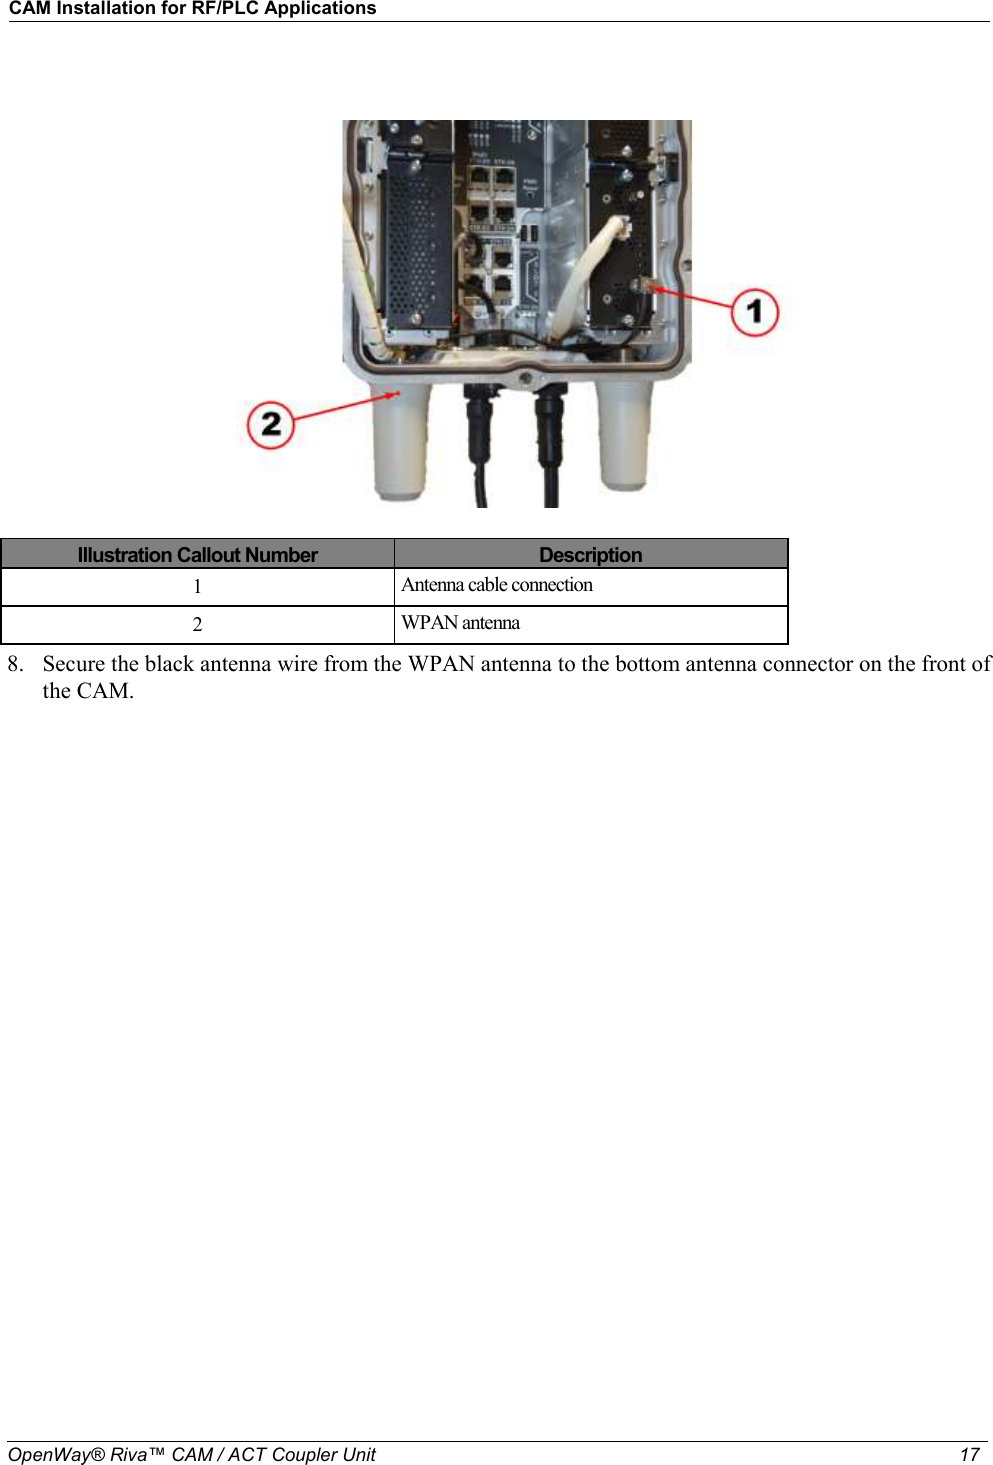 CAM Installation for RF/PLC Applications  OpenWay® Riva™ CAM / ACT Coupler Unit   17          Illustration Callout Number  Description 1  Antenna cable connection 2  WPAN antenna 8. Secure the black antenna wire from the WPAN antenna to the bottom antenna connector on the front of the CAM. 